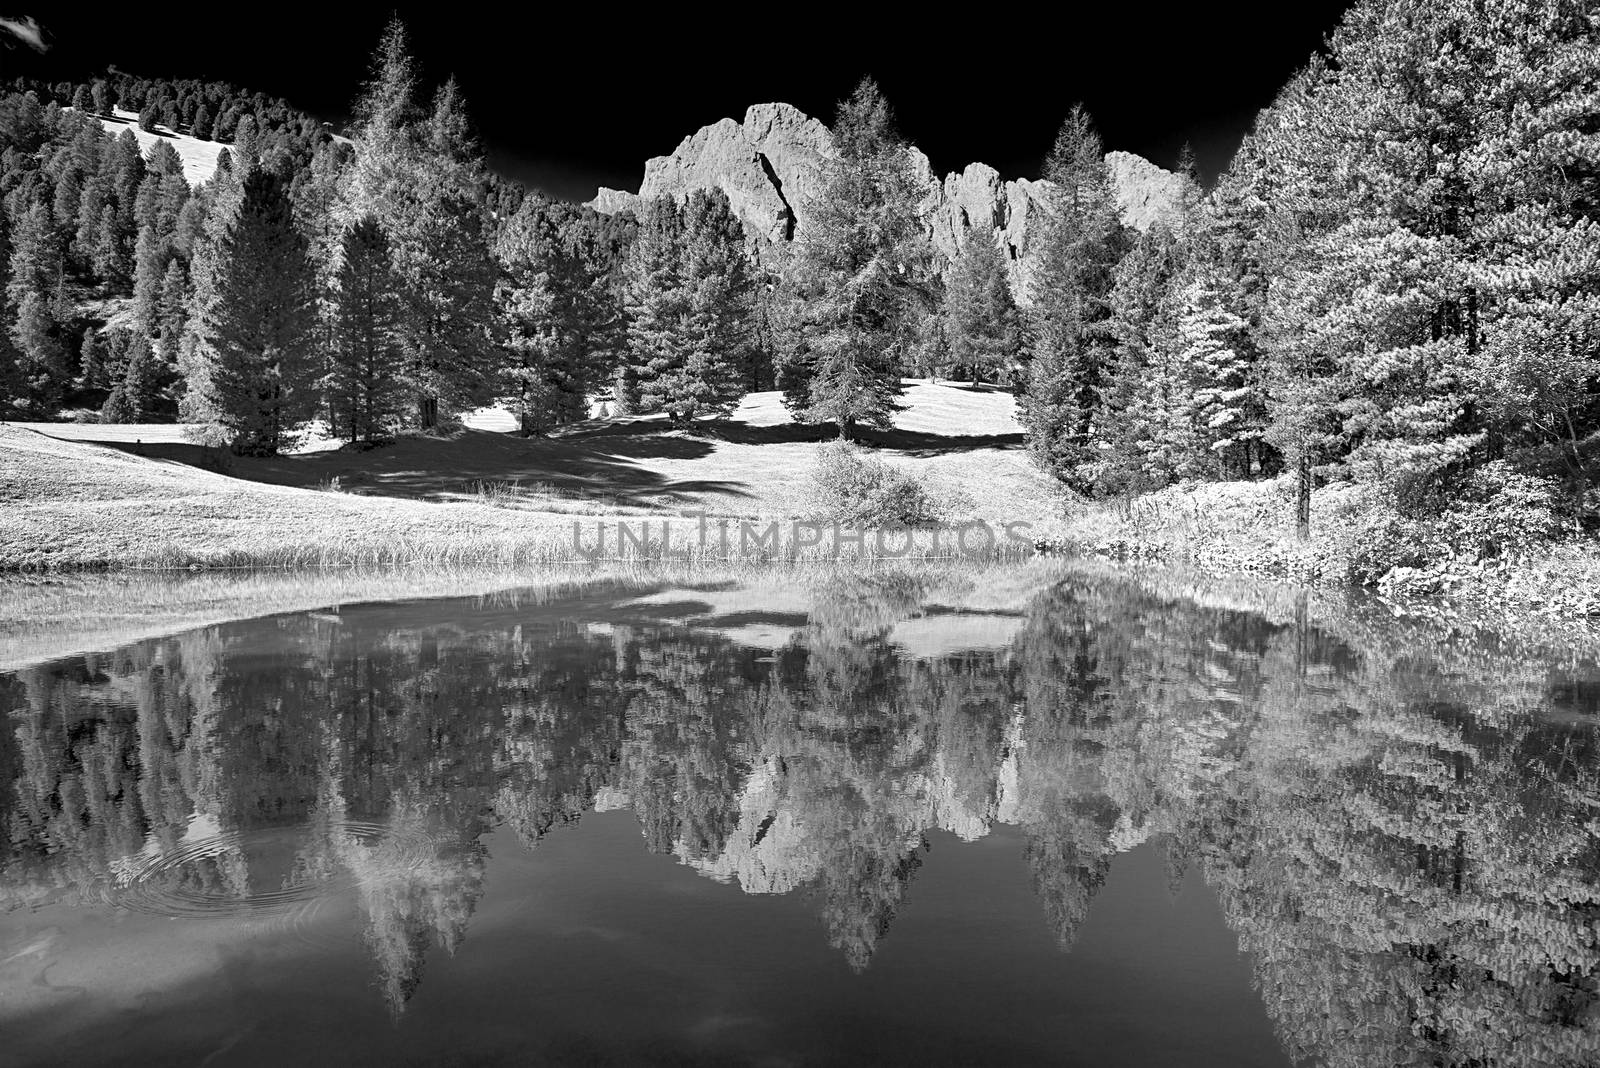 Lake in the forest with the mountains in background, summer season - Trentino-Alto Adige, Dolomites